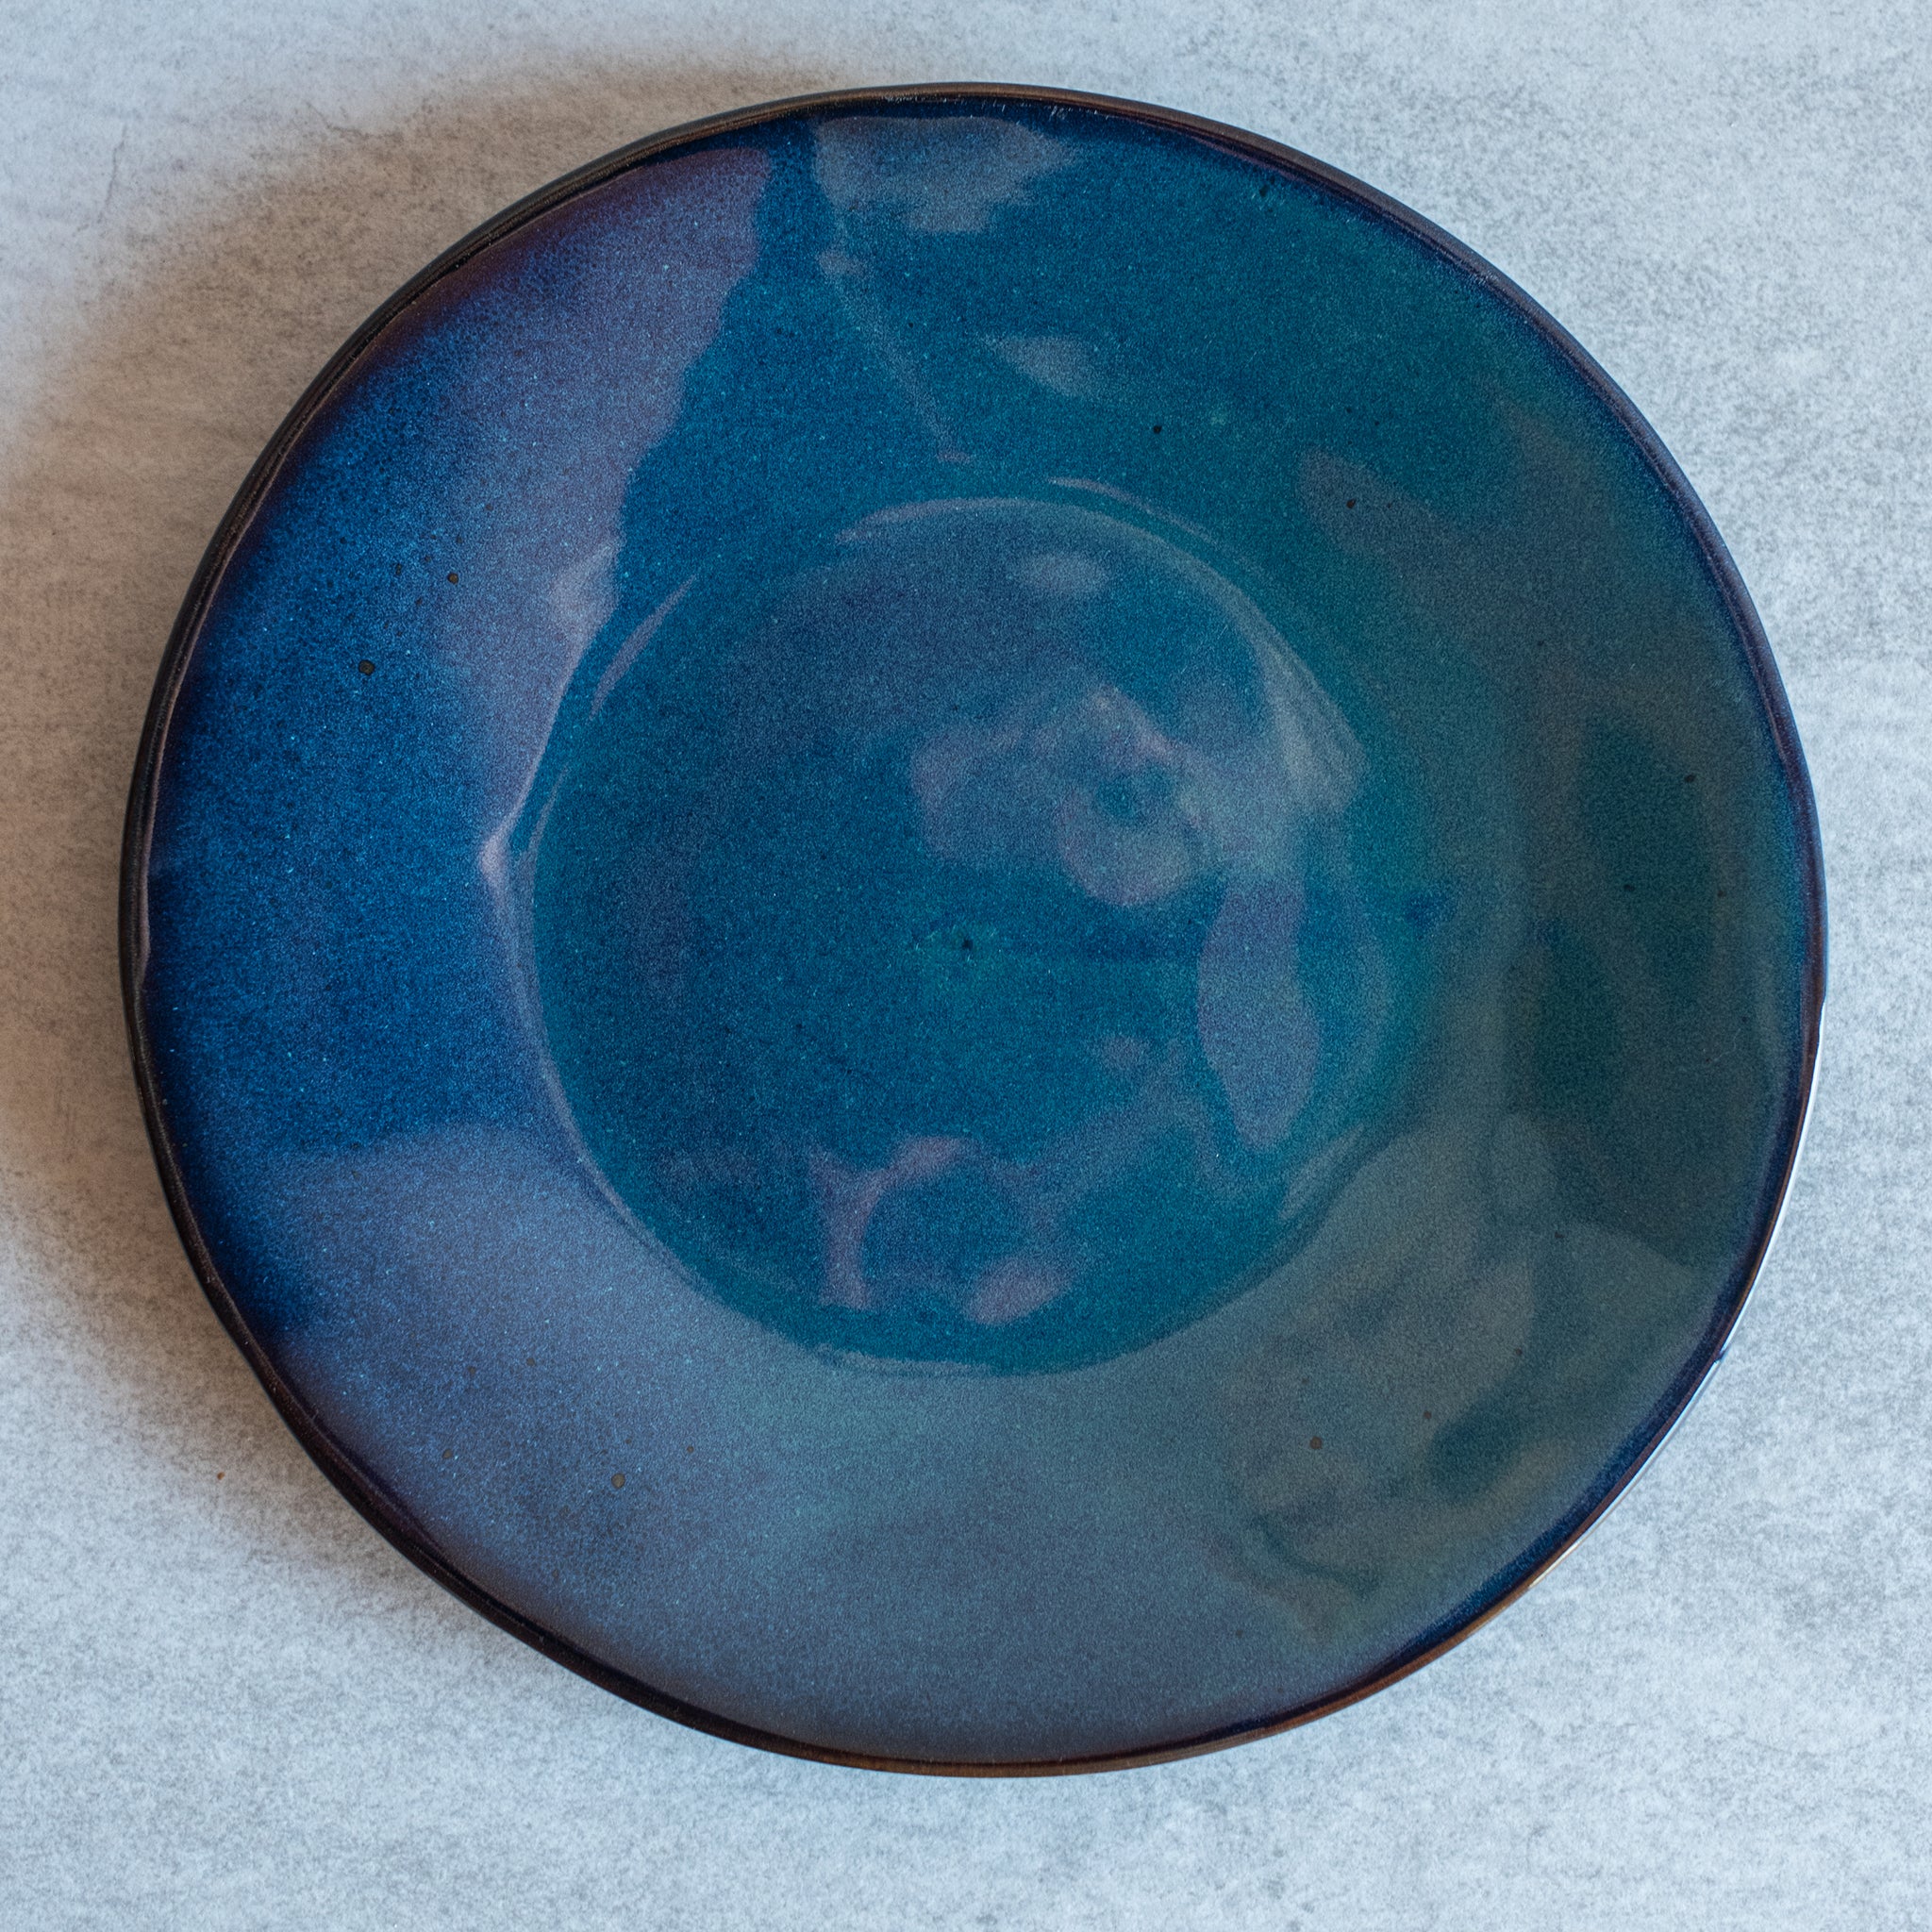 Rockpool Dinner Plate - Ocean Collection